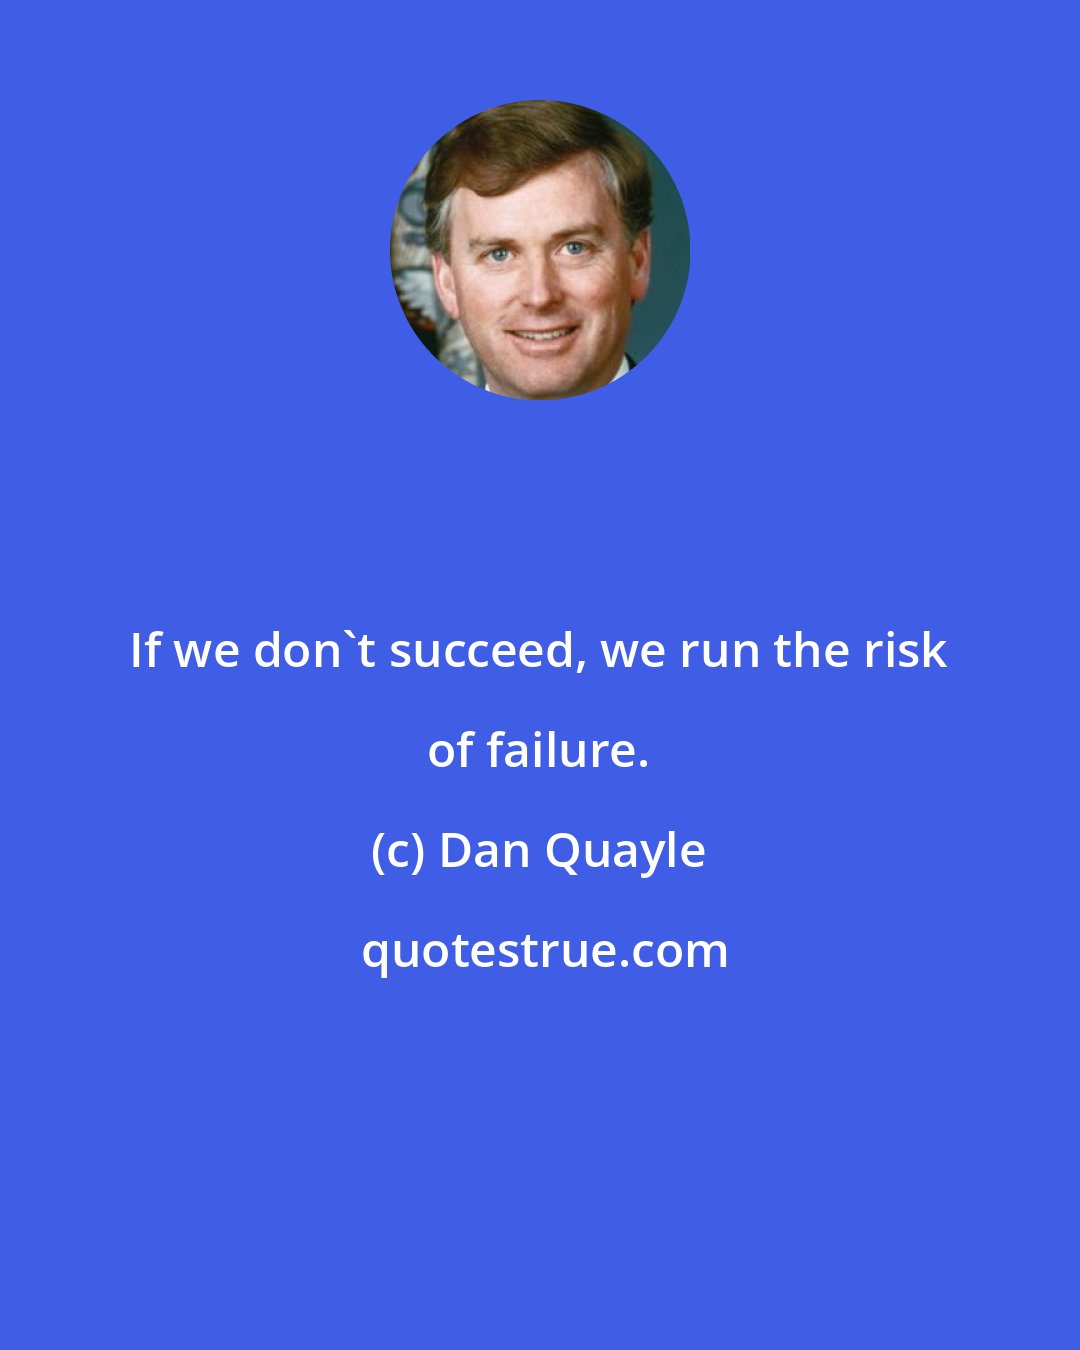 Dan Quayle: If we don't succeed, we run the risk of failure.